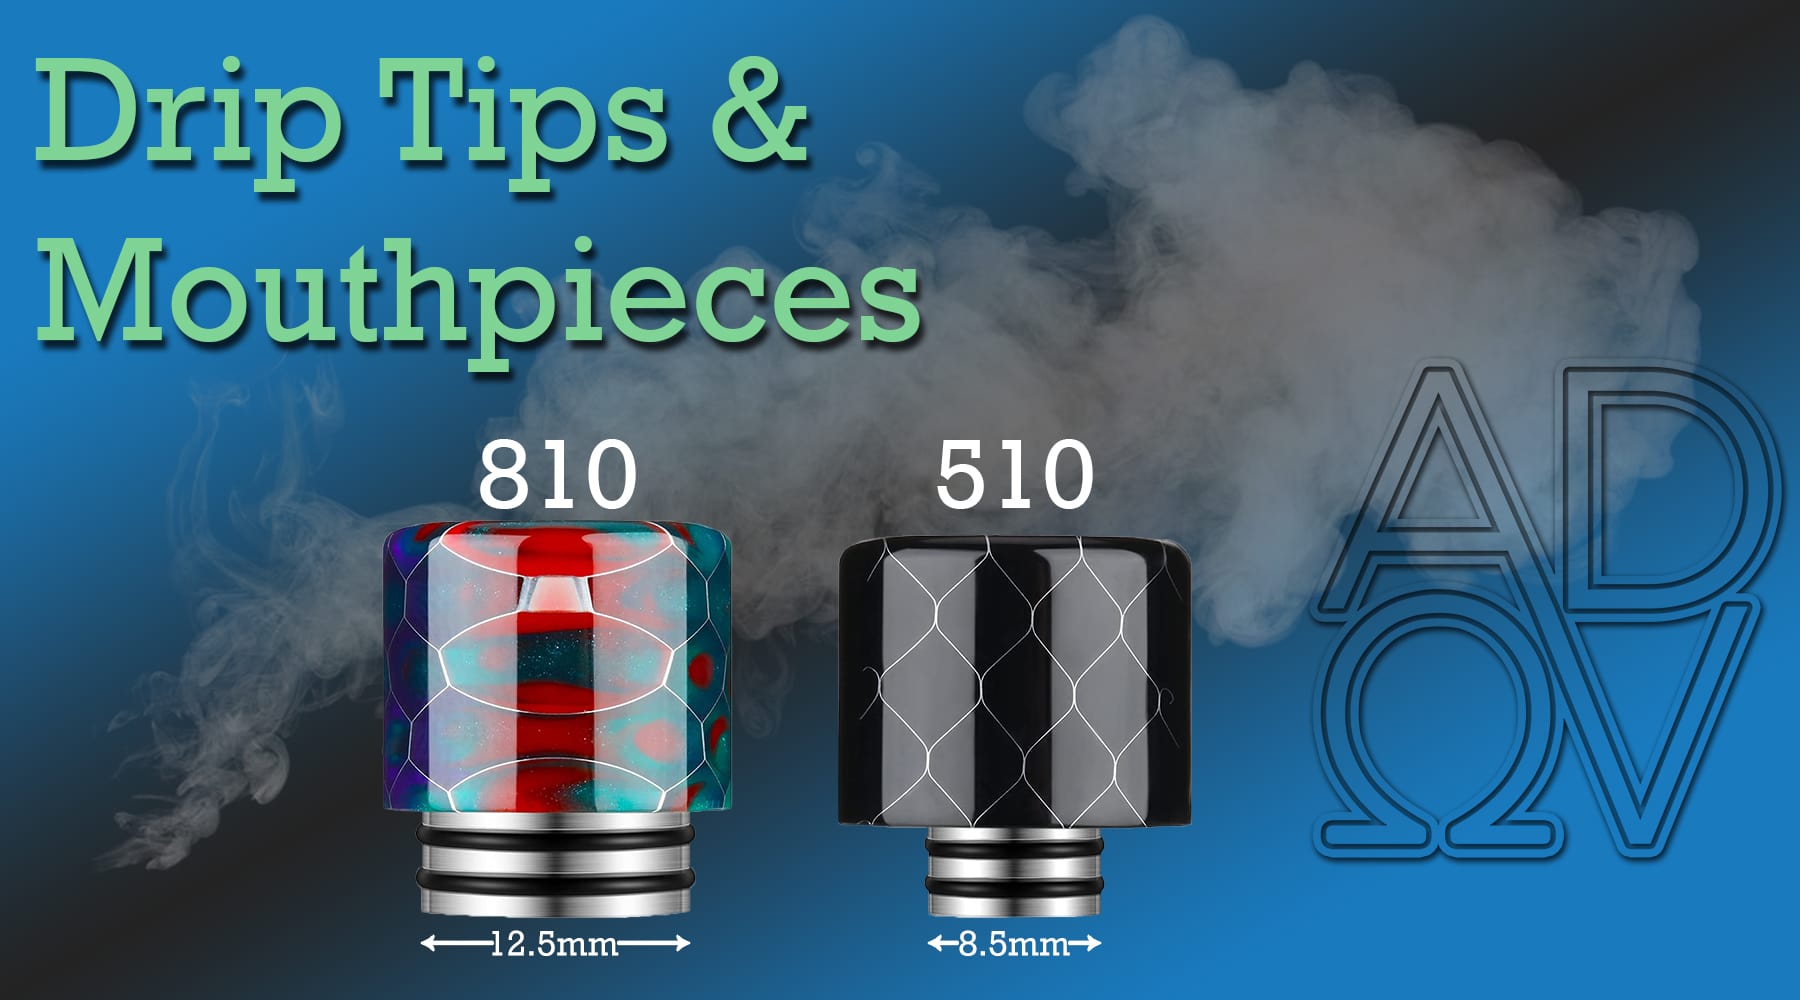 Drip Tips & Mouthpieces - 510, 810, Built-in and Proprietary